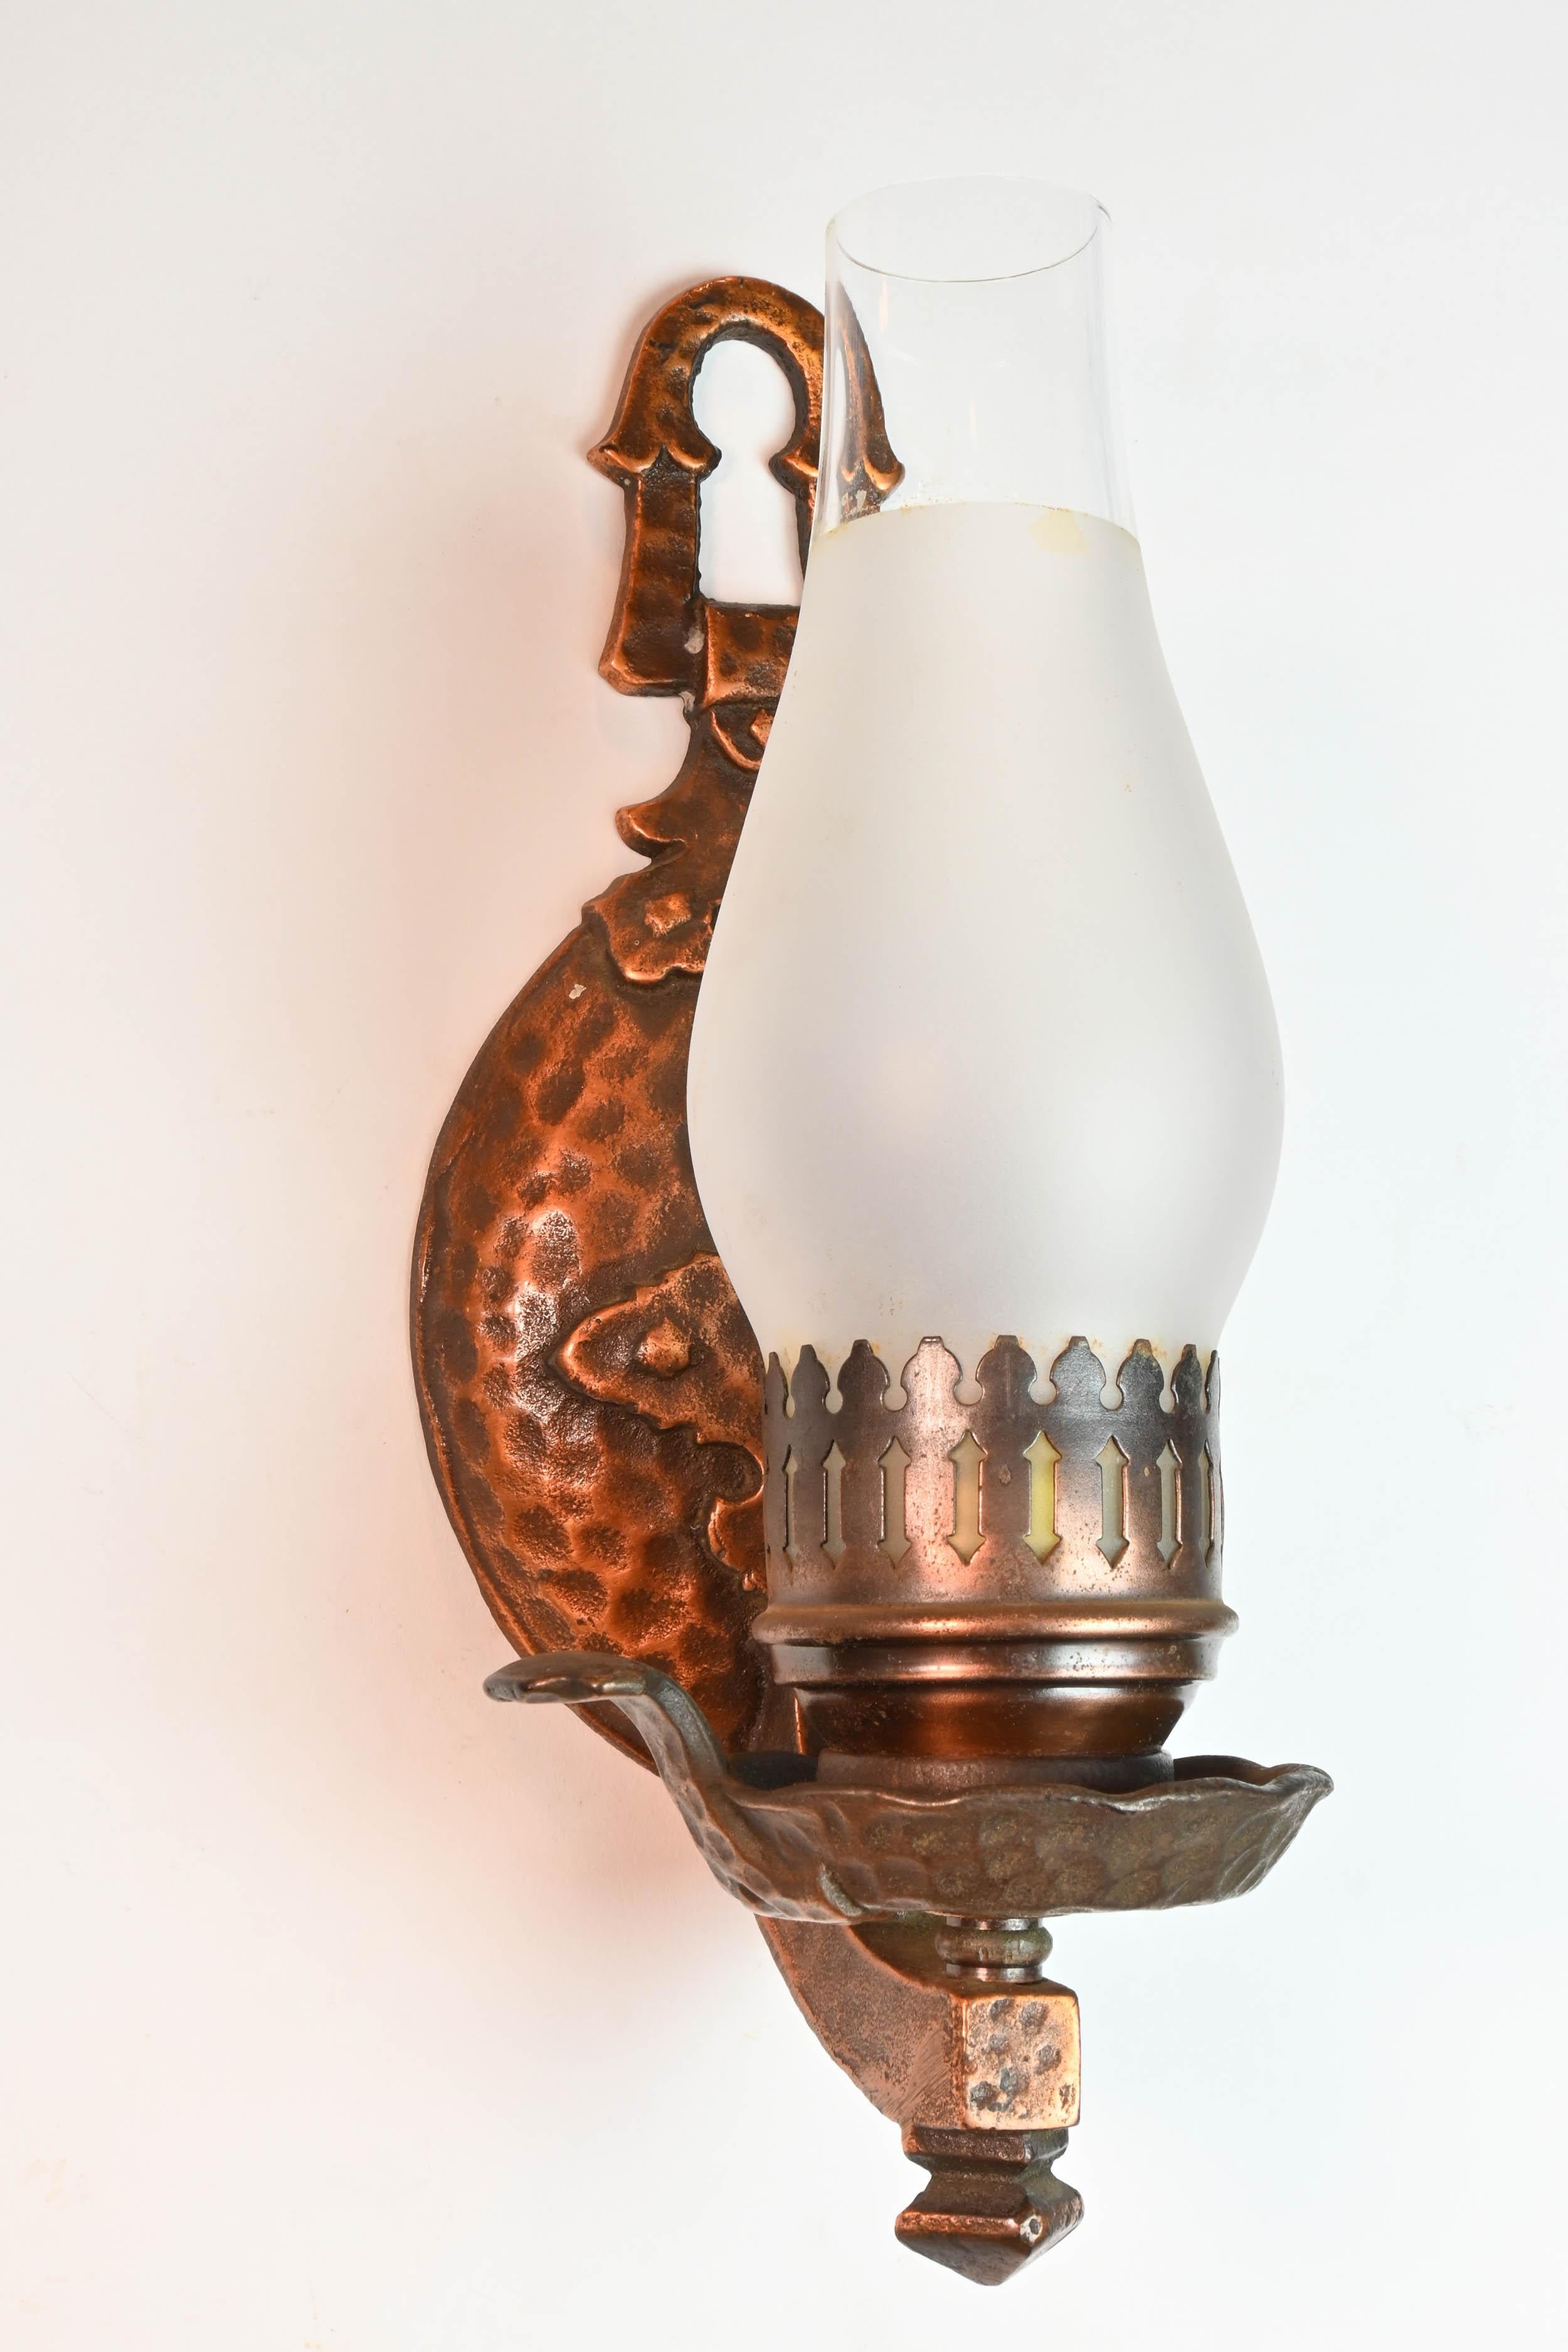 Lovely lamp-like sconces in a hammered copper finish. The little hat can be removed if desired. 

Illumination: One Edison socket
Dimensions: 11” height x 4 1/4” width x 4 1/2” projection

We find that early antique lighting was designed as